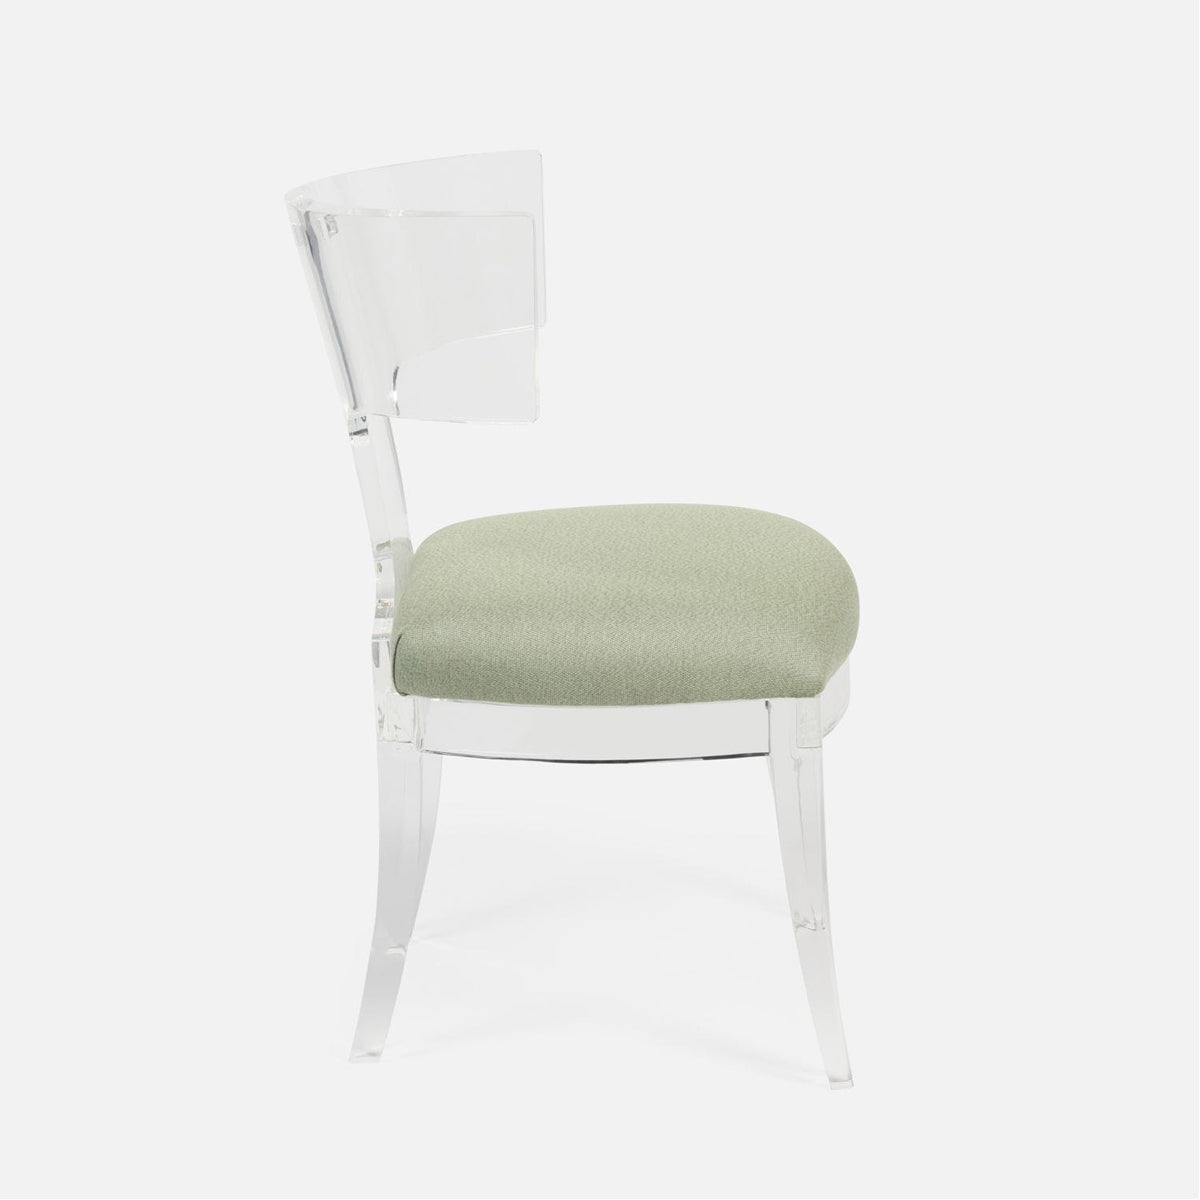 Made Goods Gibson Acrylic Wingback Dining Chair  in Ivondro Raffia